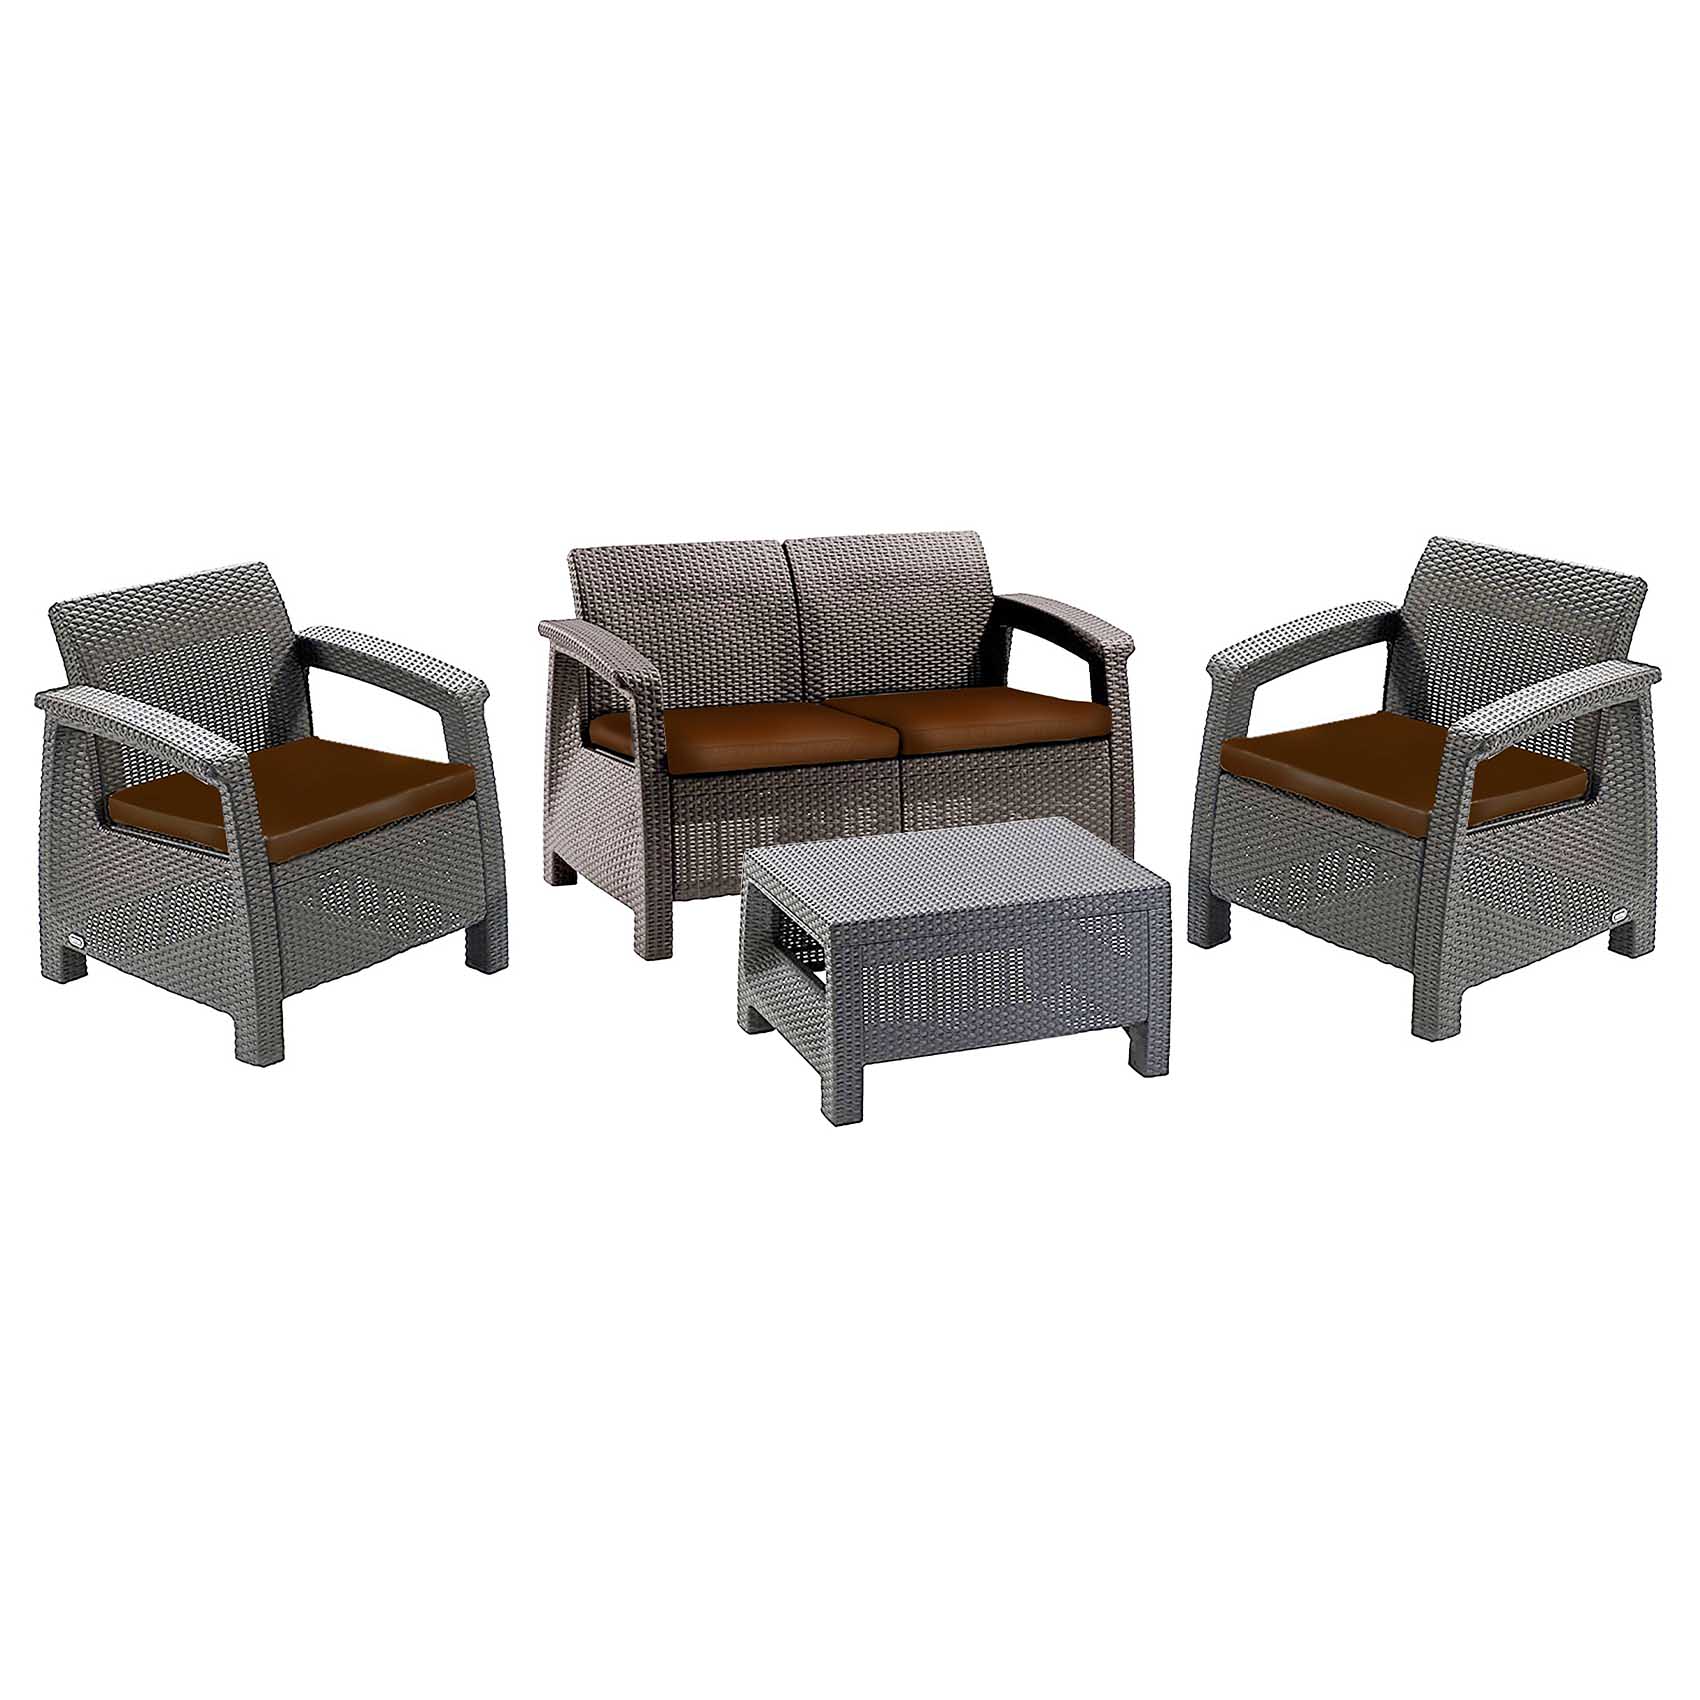 NAMSON 4 seat Outdoor furniture with cushion and coffee table
Material – plastic
1 pc Long chair 2 seater
2 pcs Chair
1 pc coffee table
Made in IRAN -OUTDOOR FURNITURE PATIO FURNITURE -GARDEN FURNITURE 32742 WHETHER PROOF